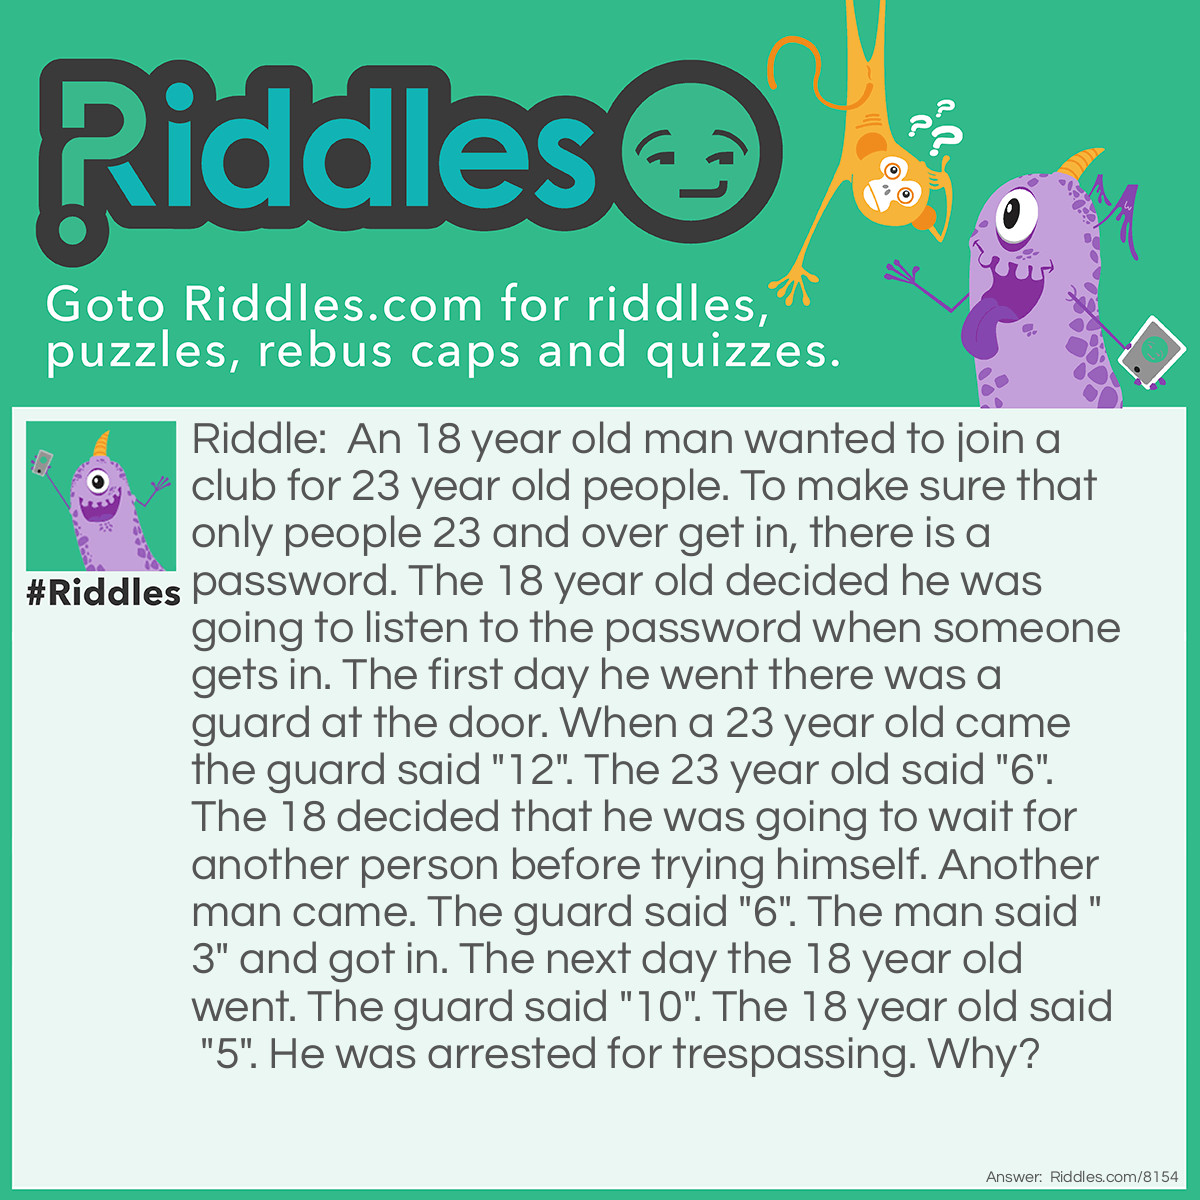 Riddle: An 18 year old man wanted to join a club for 23 year old people. To make sure that only people 23 and over get in, there is a password. The 18 year old decided he was going to listen to the password when someone gets in. The first day he went there was a guard at the door. When a 23 year old came the guard said "12". The 23 year old said "6". The 18 decided that he was going to wait for another person before trying himself. Another man came. The guard said "6". The man said "3" and got in. The next day the 18 year old went. The guard said "10". The 18 year old said "5". He was arrested for trespassing. Why? Answer: The answer to the question was the amount of letters when you write the number down in words so he should have said 3.